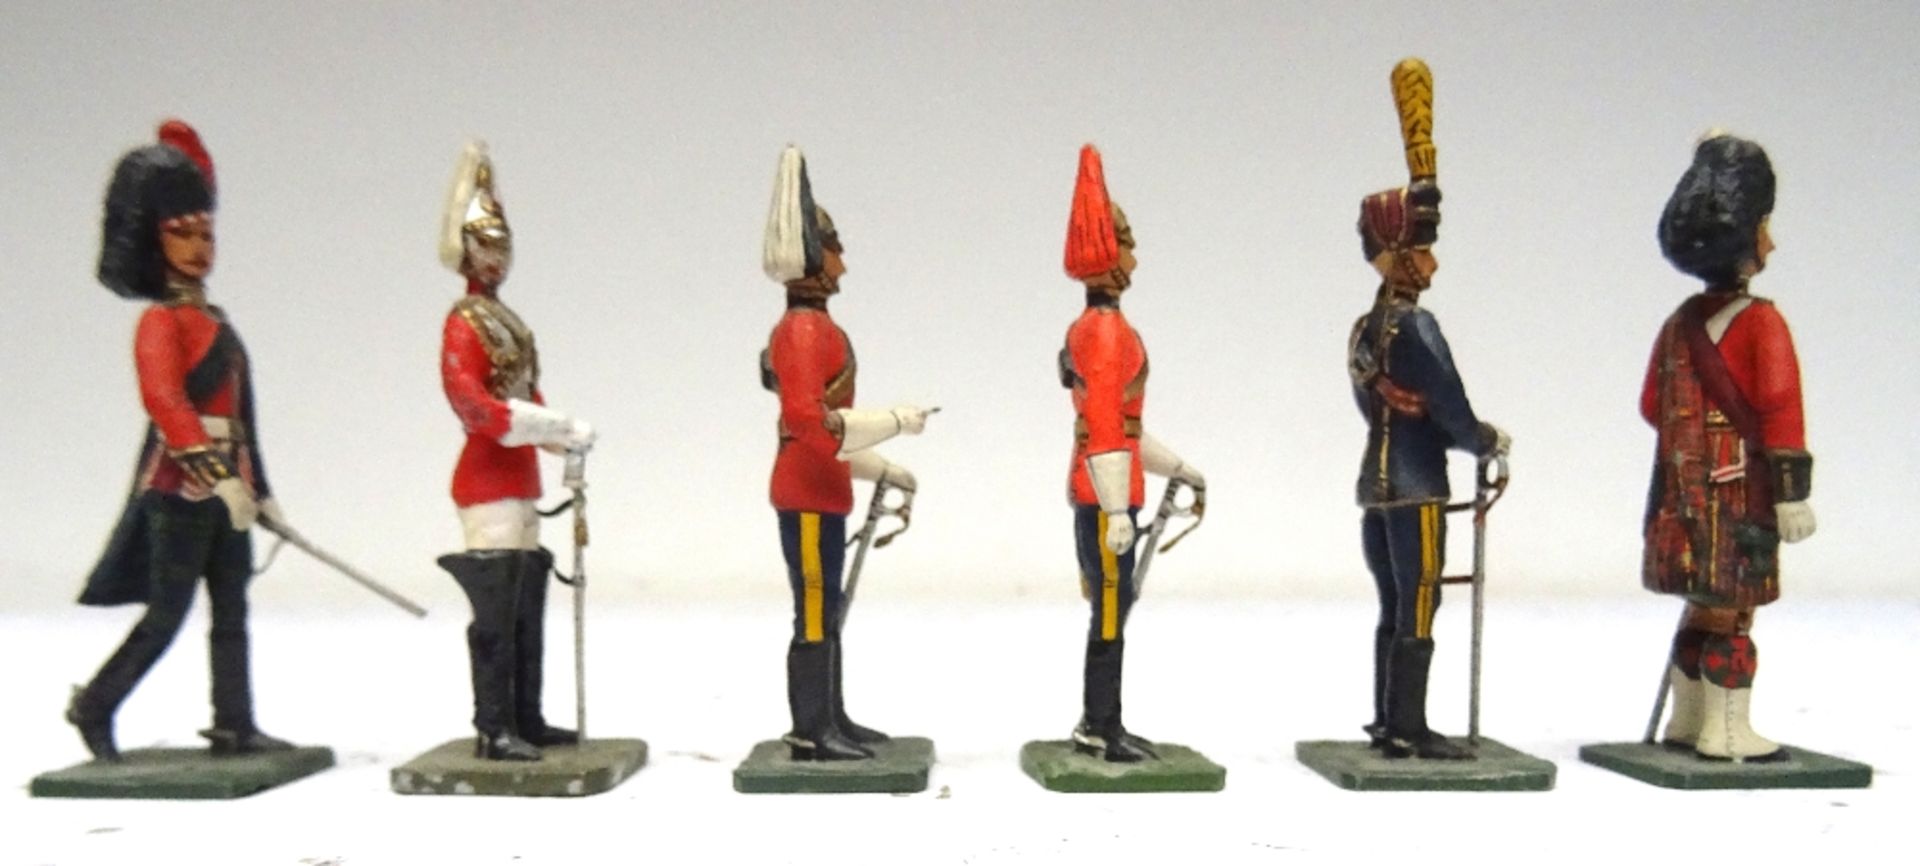 Greenwood and Ball Full Dress Officers of the British Army - Image 5 of 6